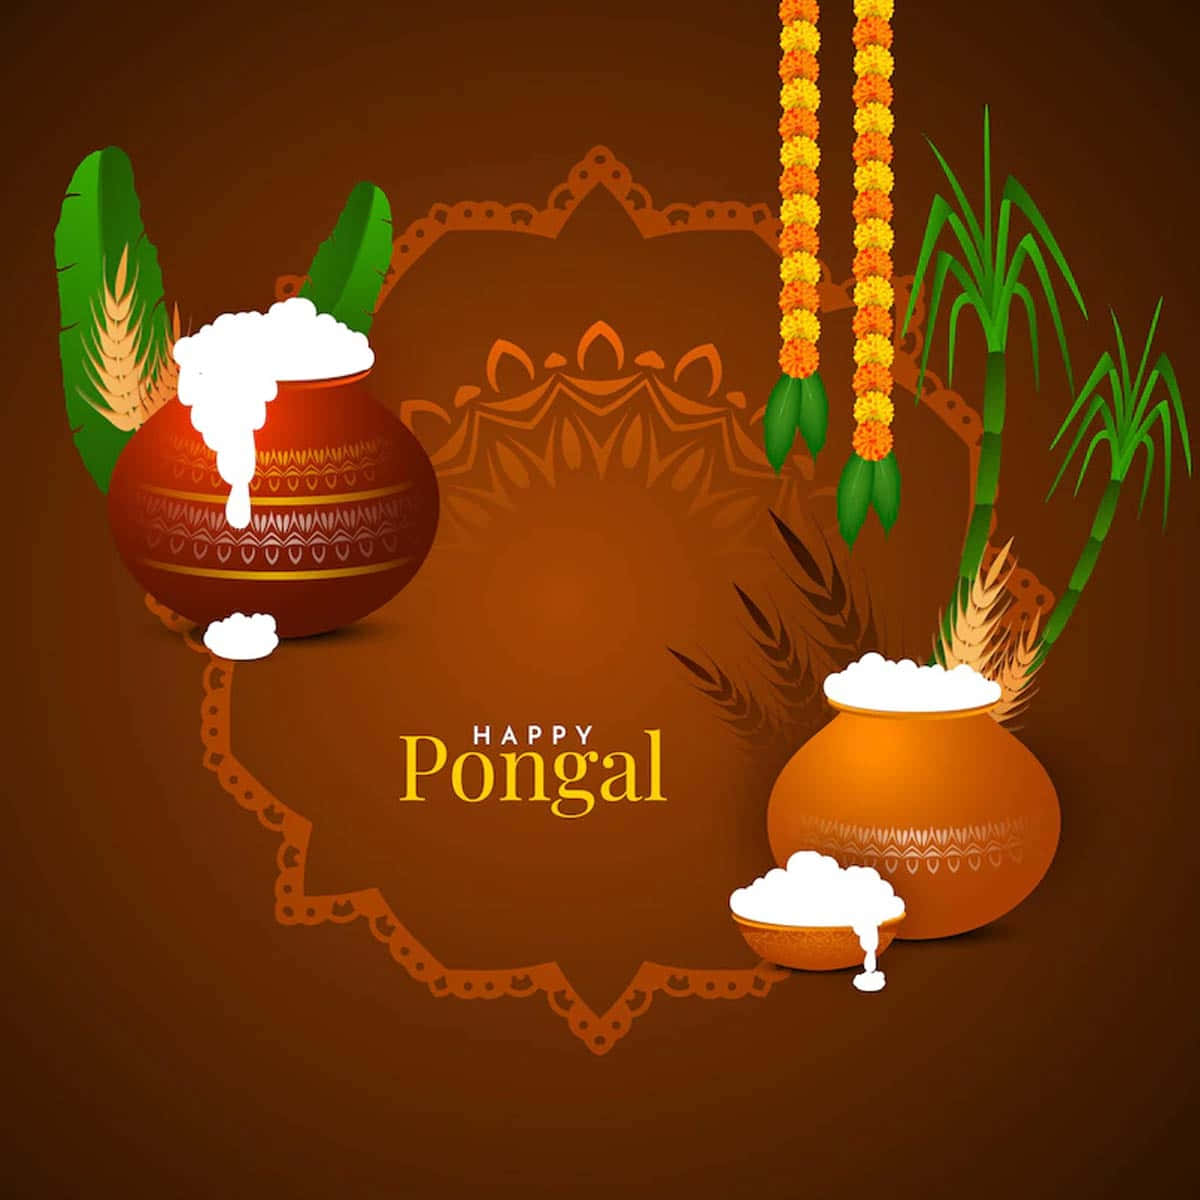 Download Pongal 1200 X 1200 Picture | Wallpapers.com